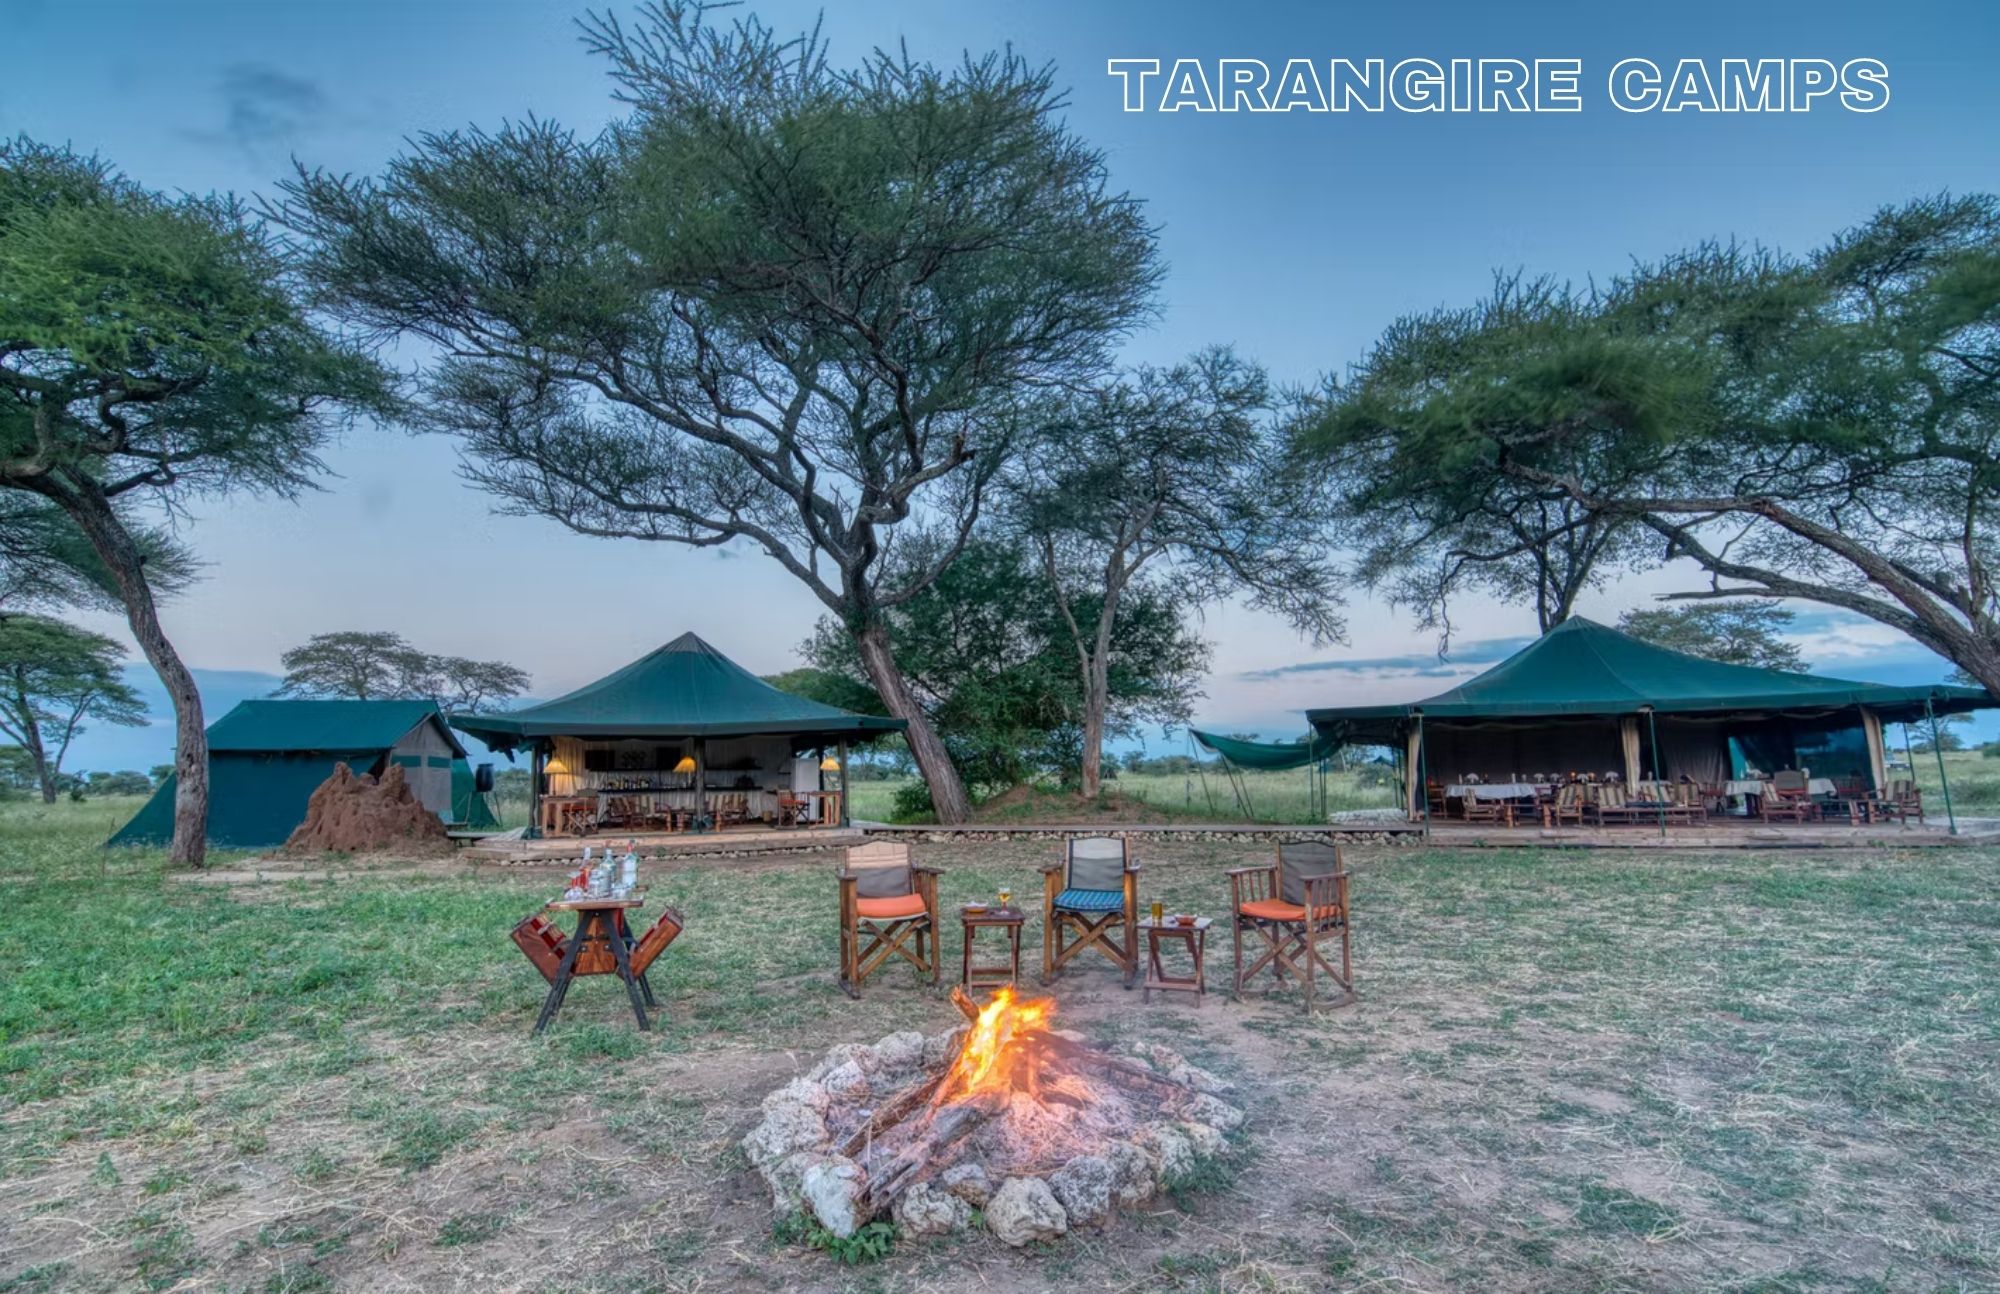 Tarangire National Park's accommodation camps feature large, expansive trees and a campfire